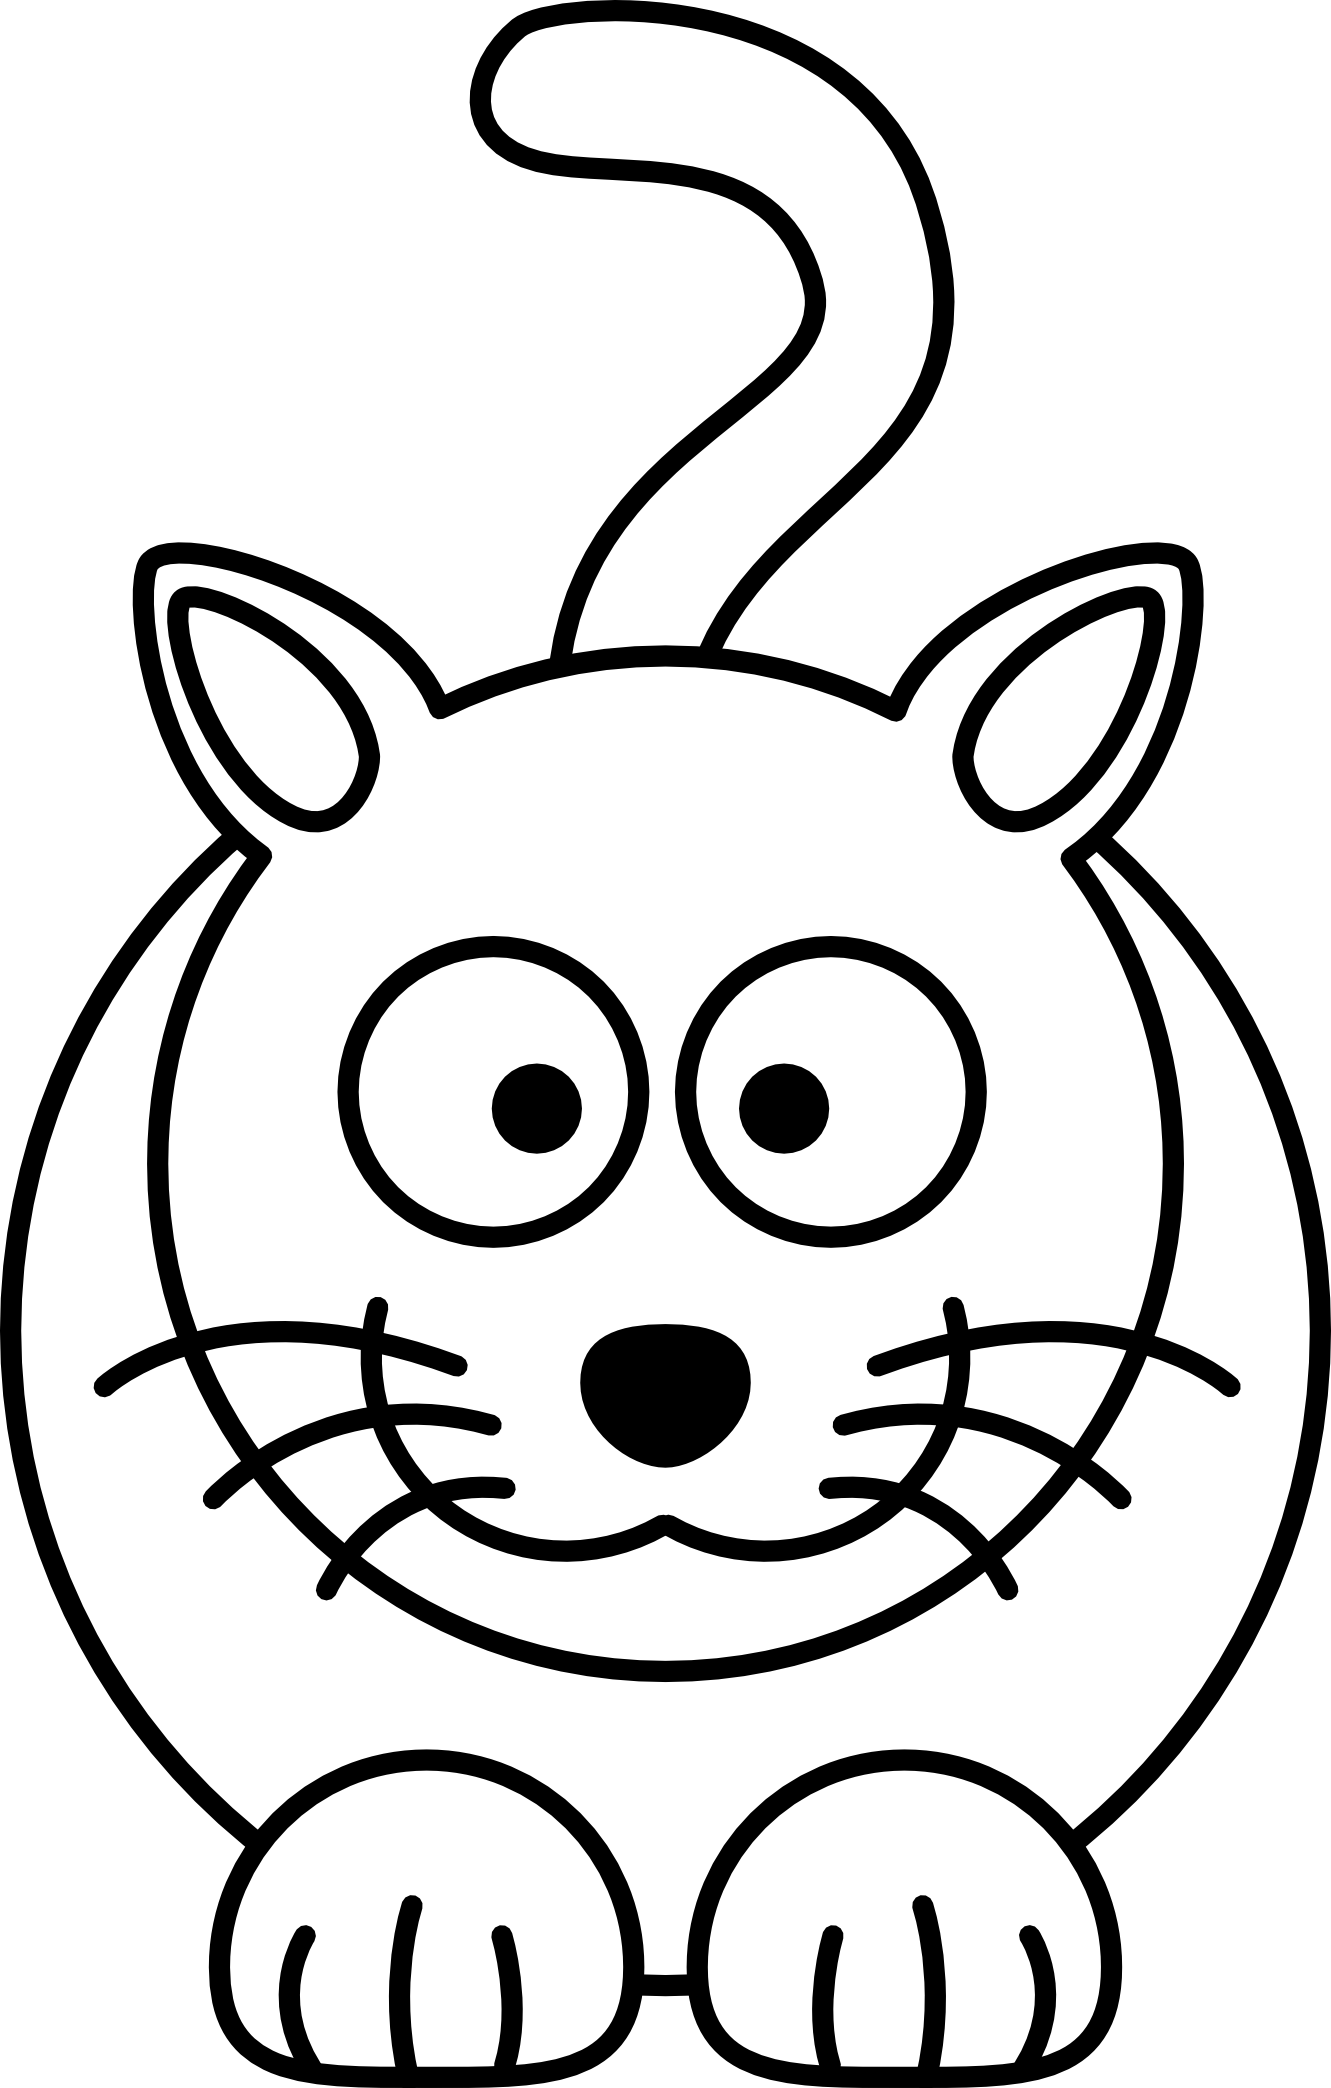 Images For > Cute Cartoon Kitty Face